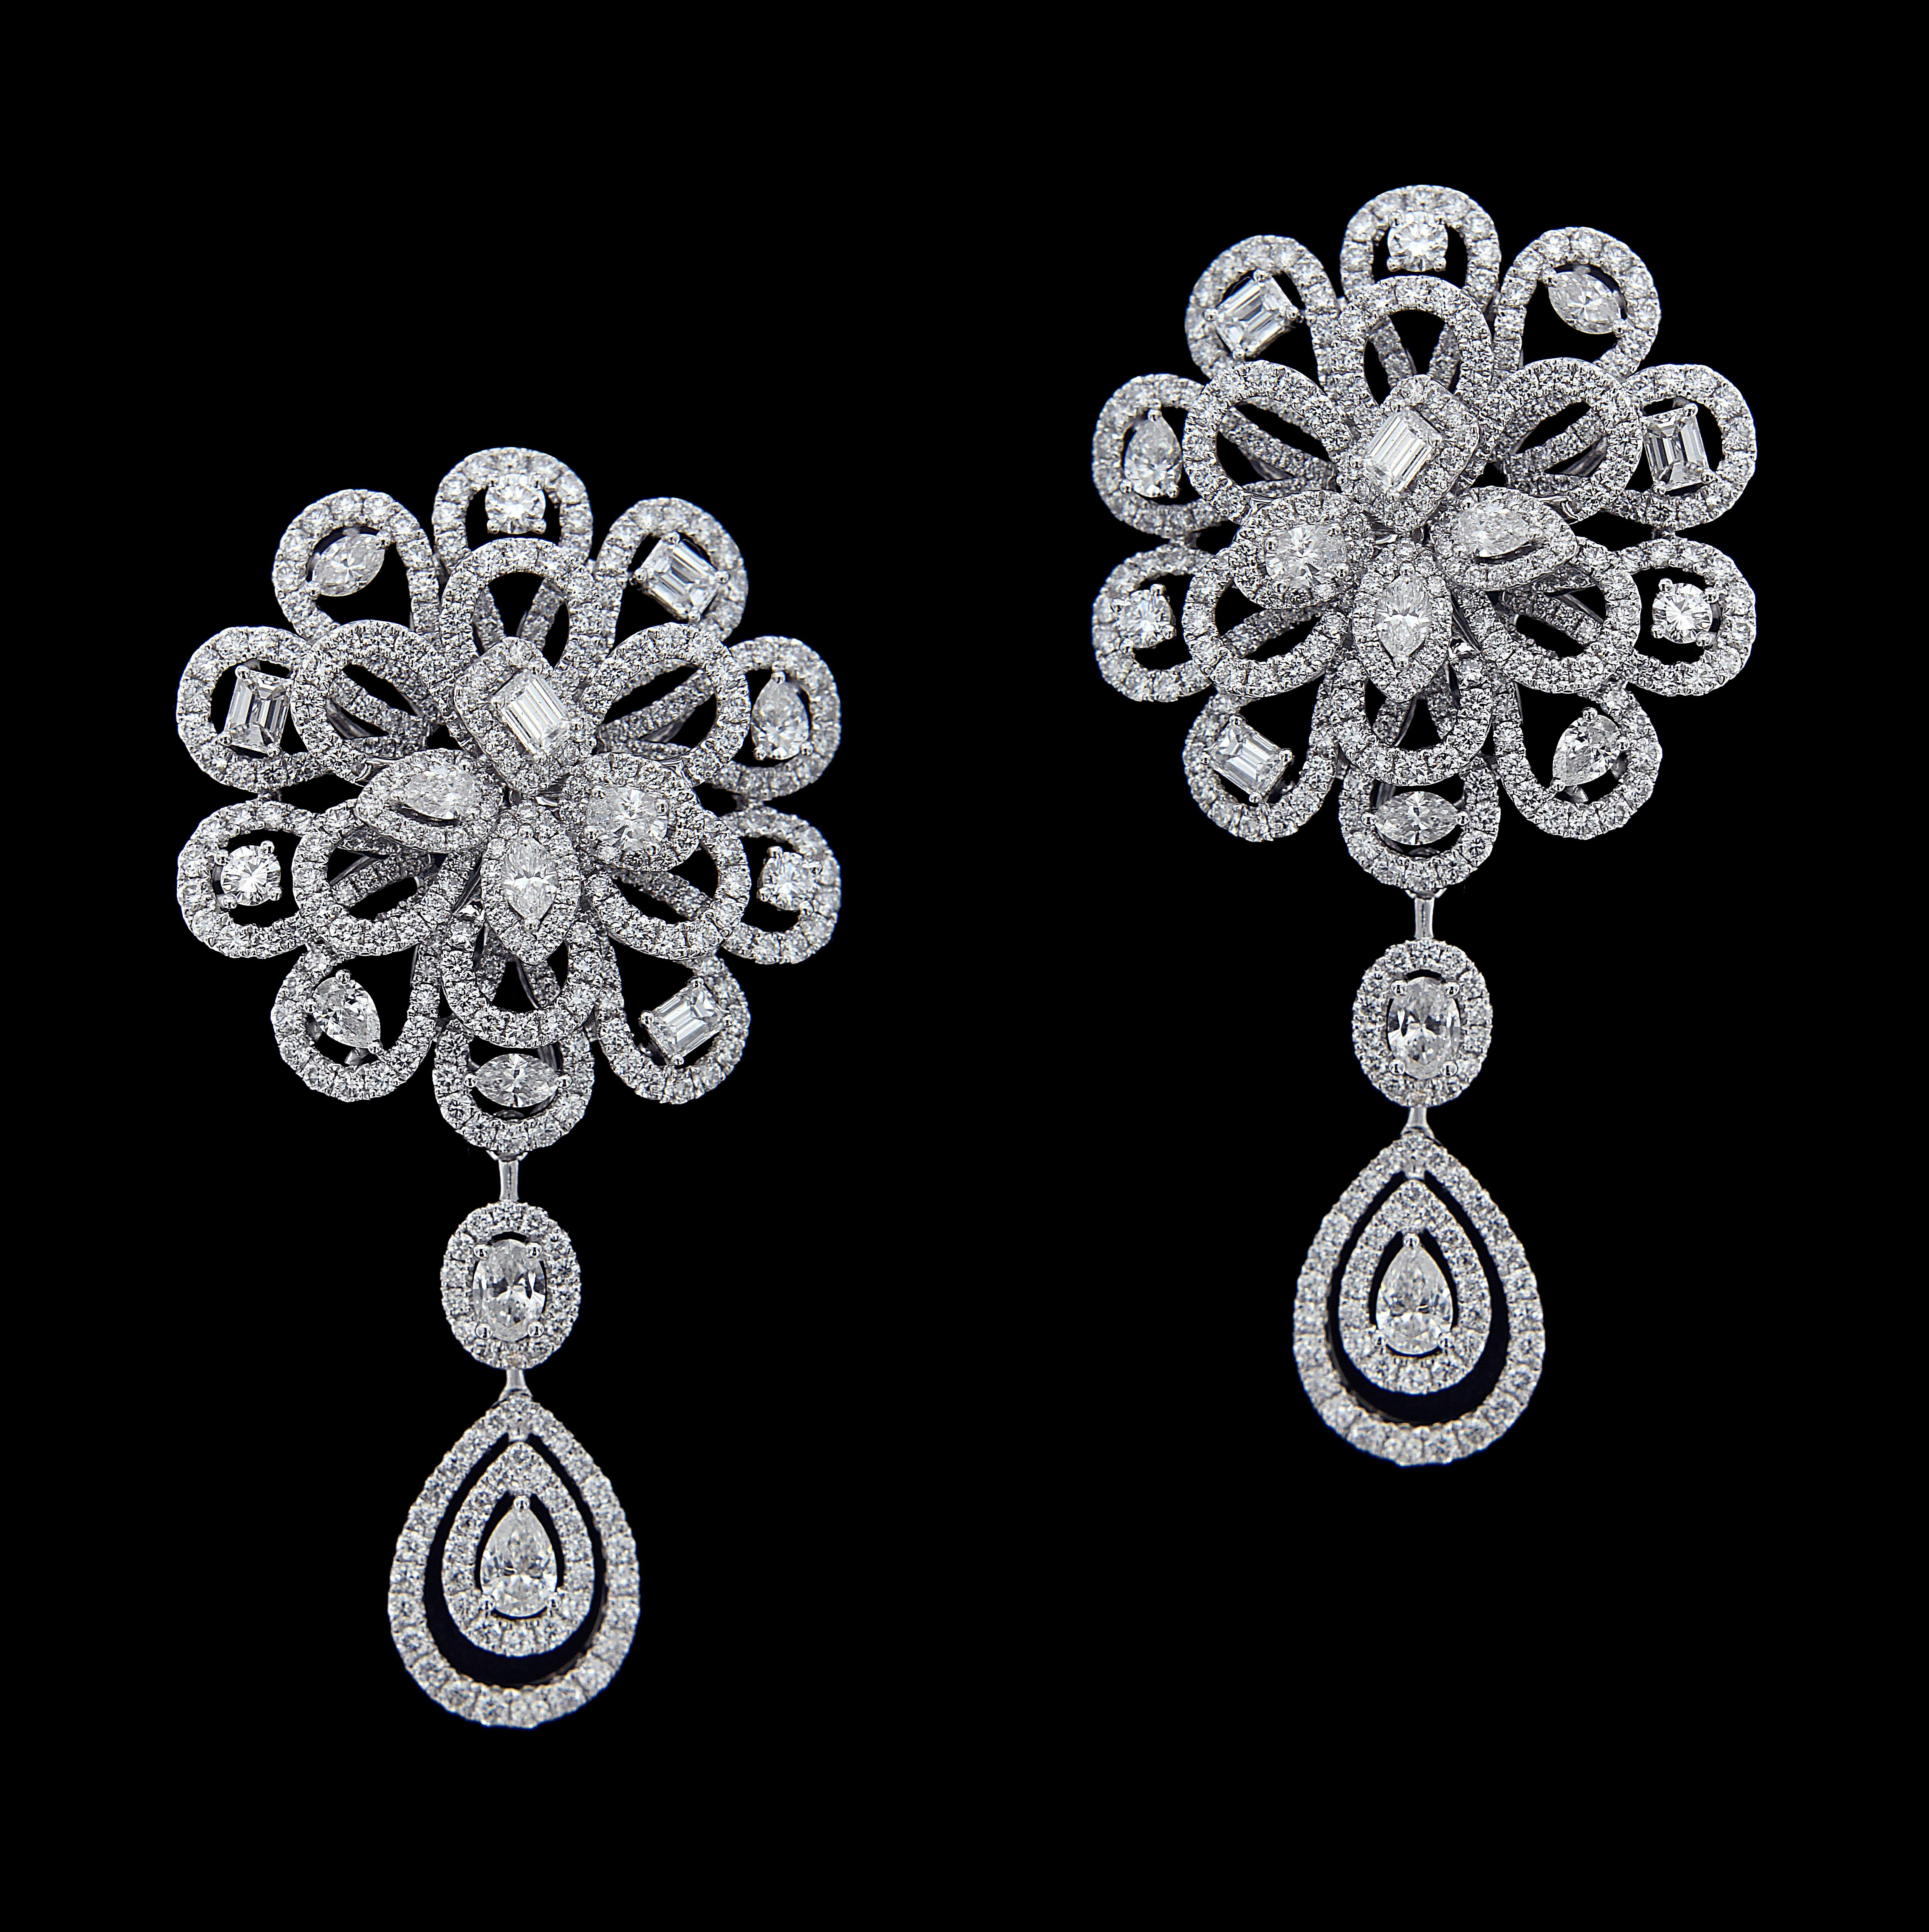 Gorgeous 18 Karat Gold And Diamonds Theme Party Set.

Earrings:
Diamonds of approximately 6.494 carats, mounted on 18 karat white gold earring. The earring weighs approximately around 23.551 grams.

Please note: The charges specified do not include